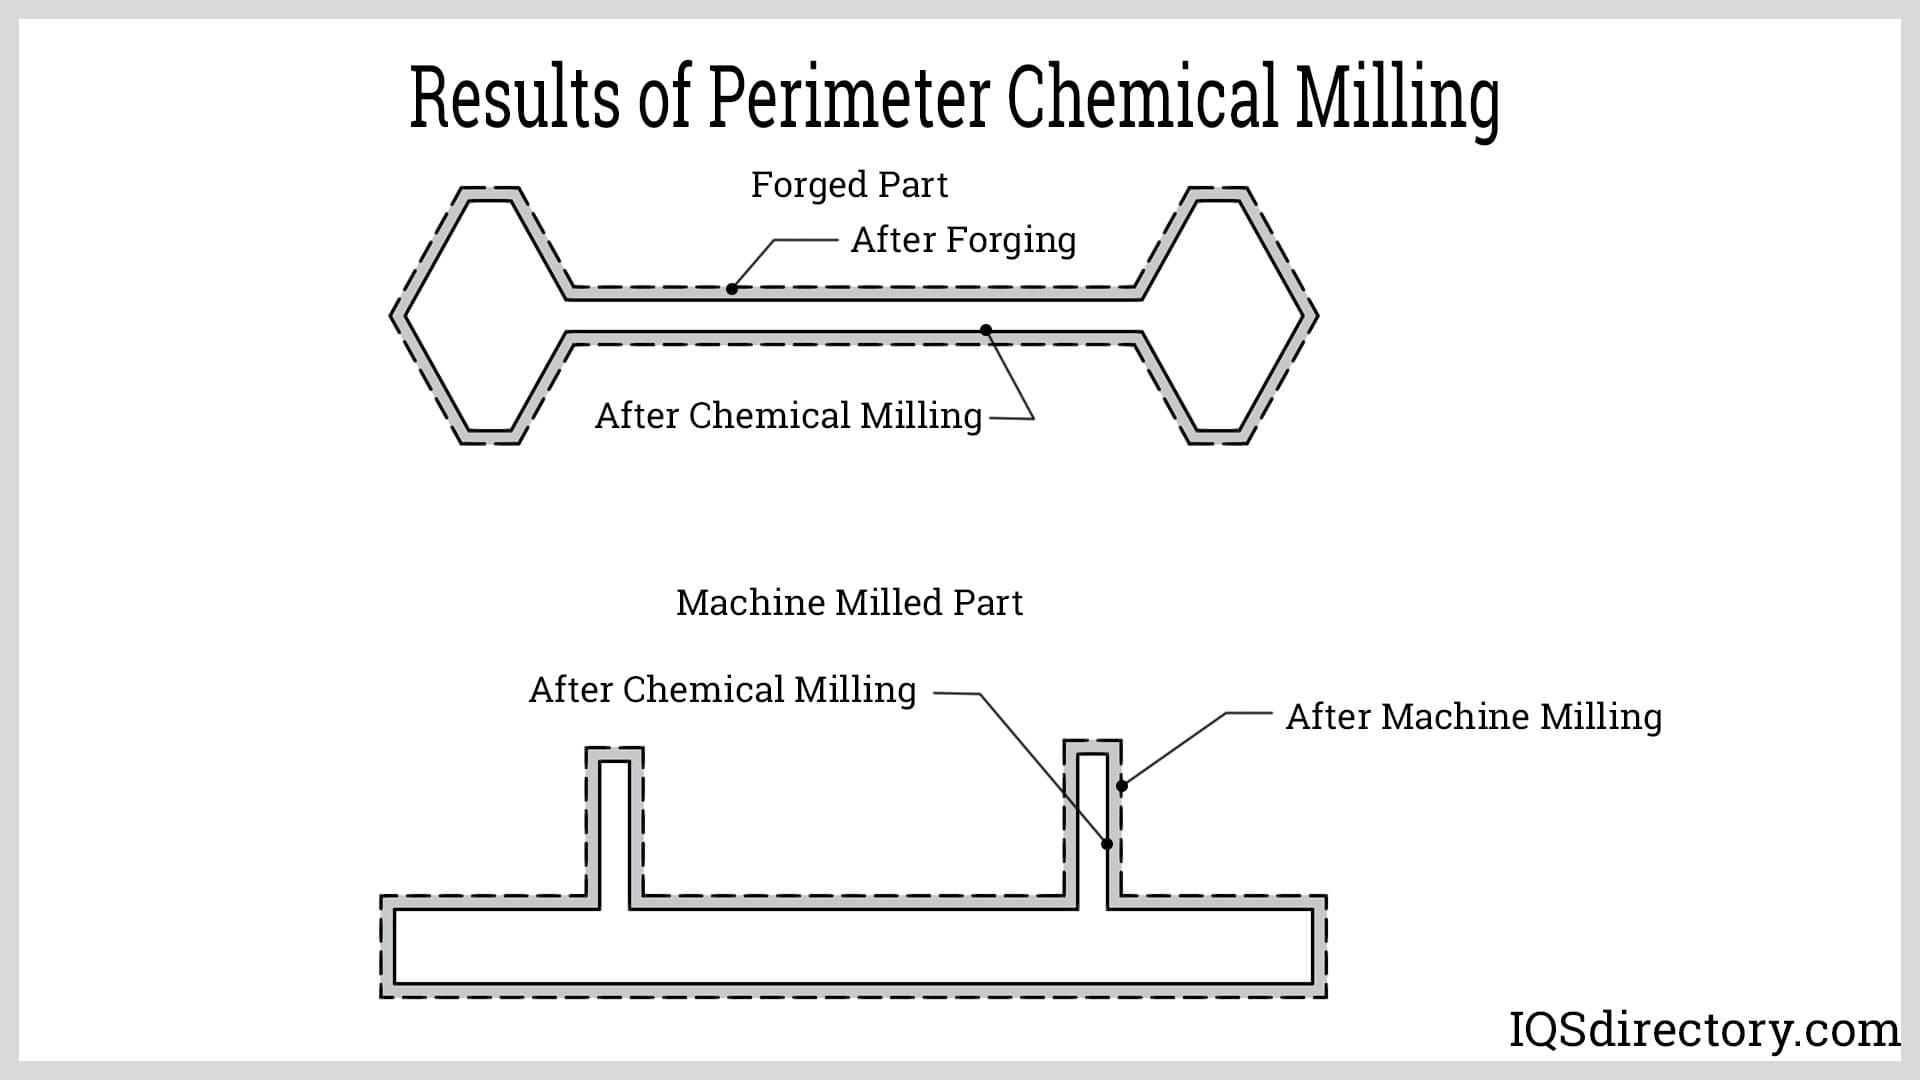 Results of Perimeter Chemical Milling